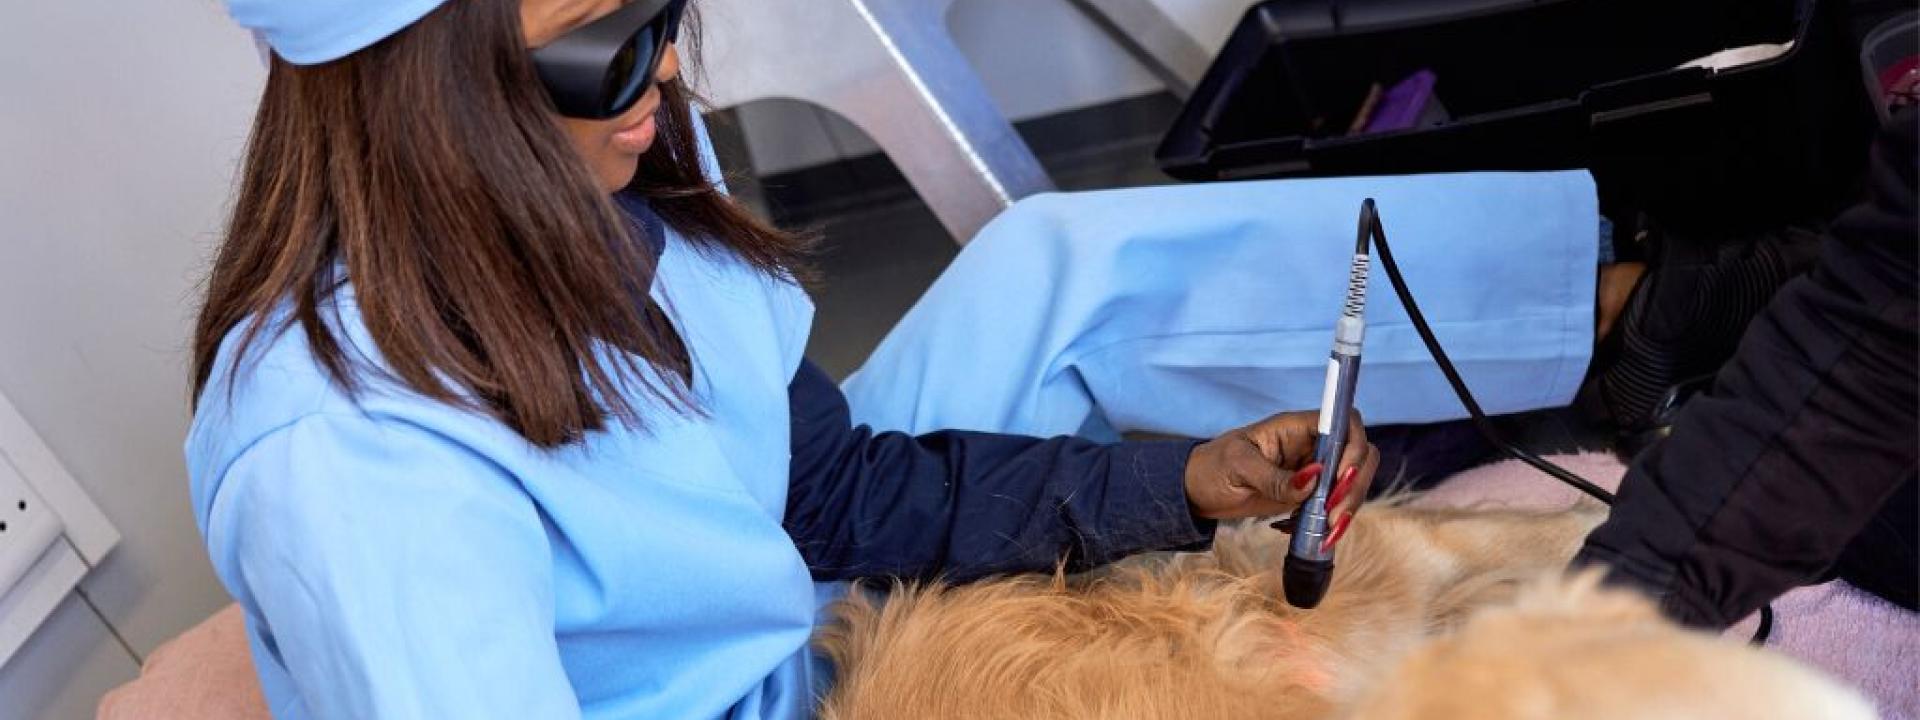 Dog getting laser treatment on knee with veterinarian wearing goggles